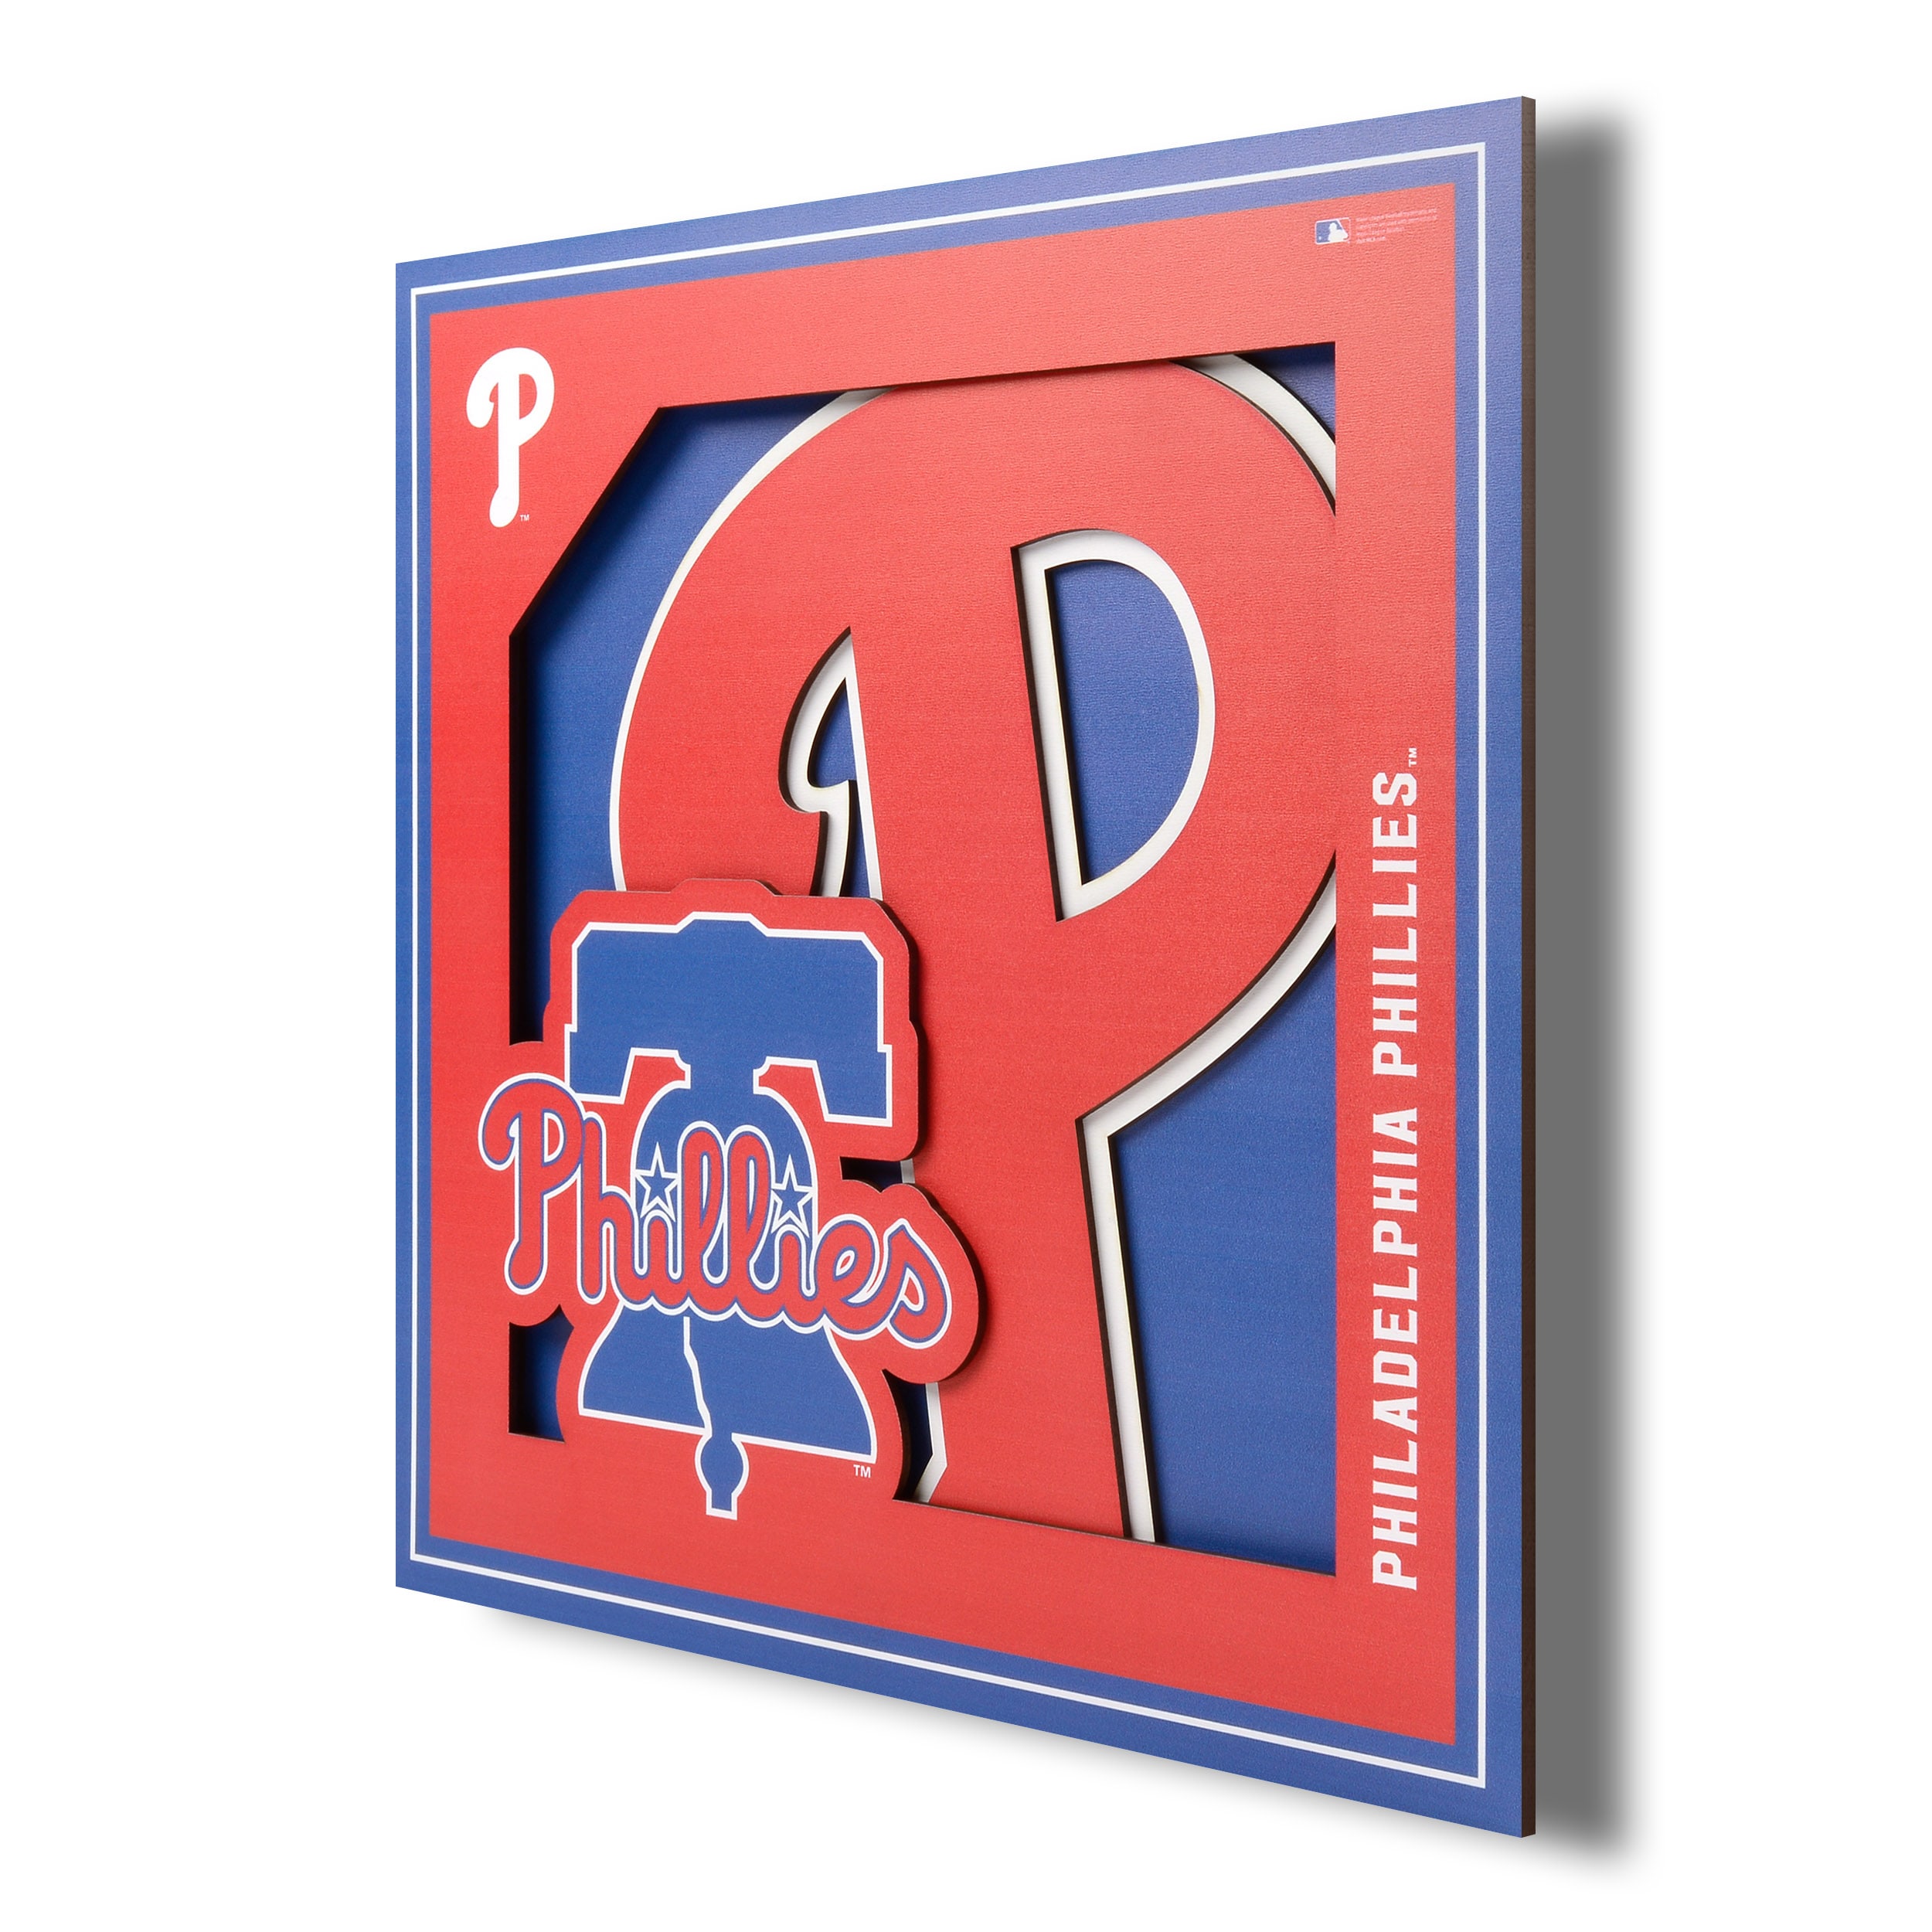 Phillies Fabric, Wallpaper and Home Decor